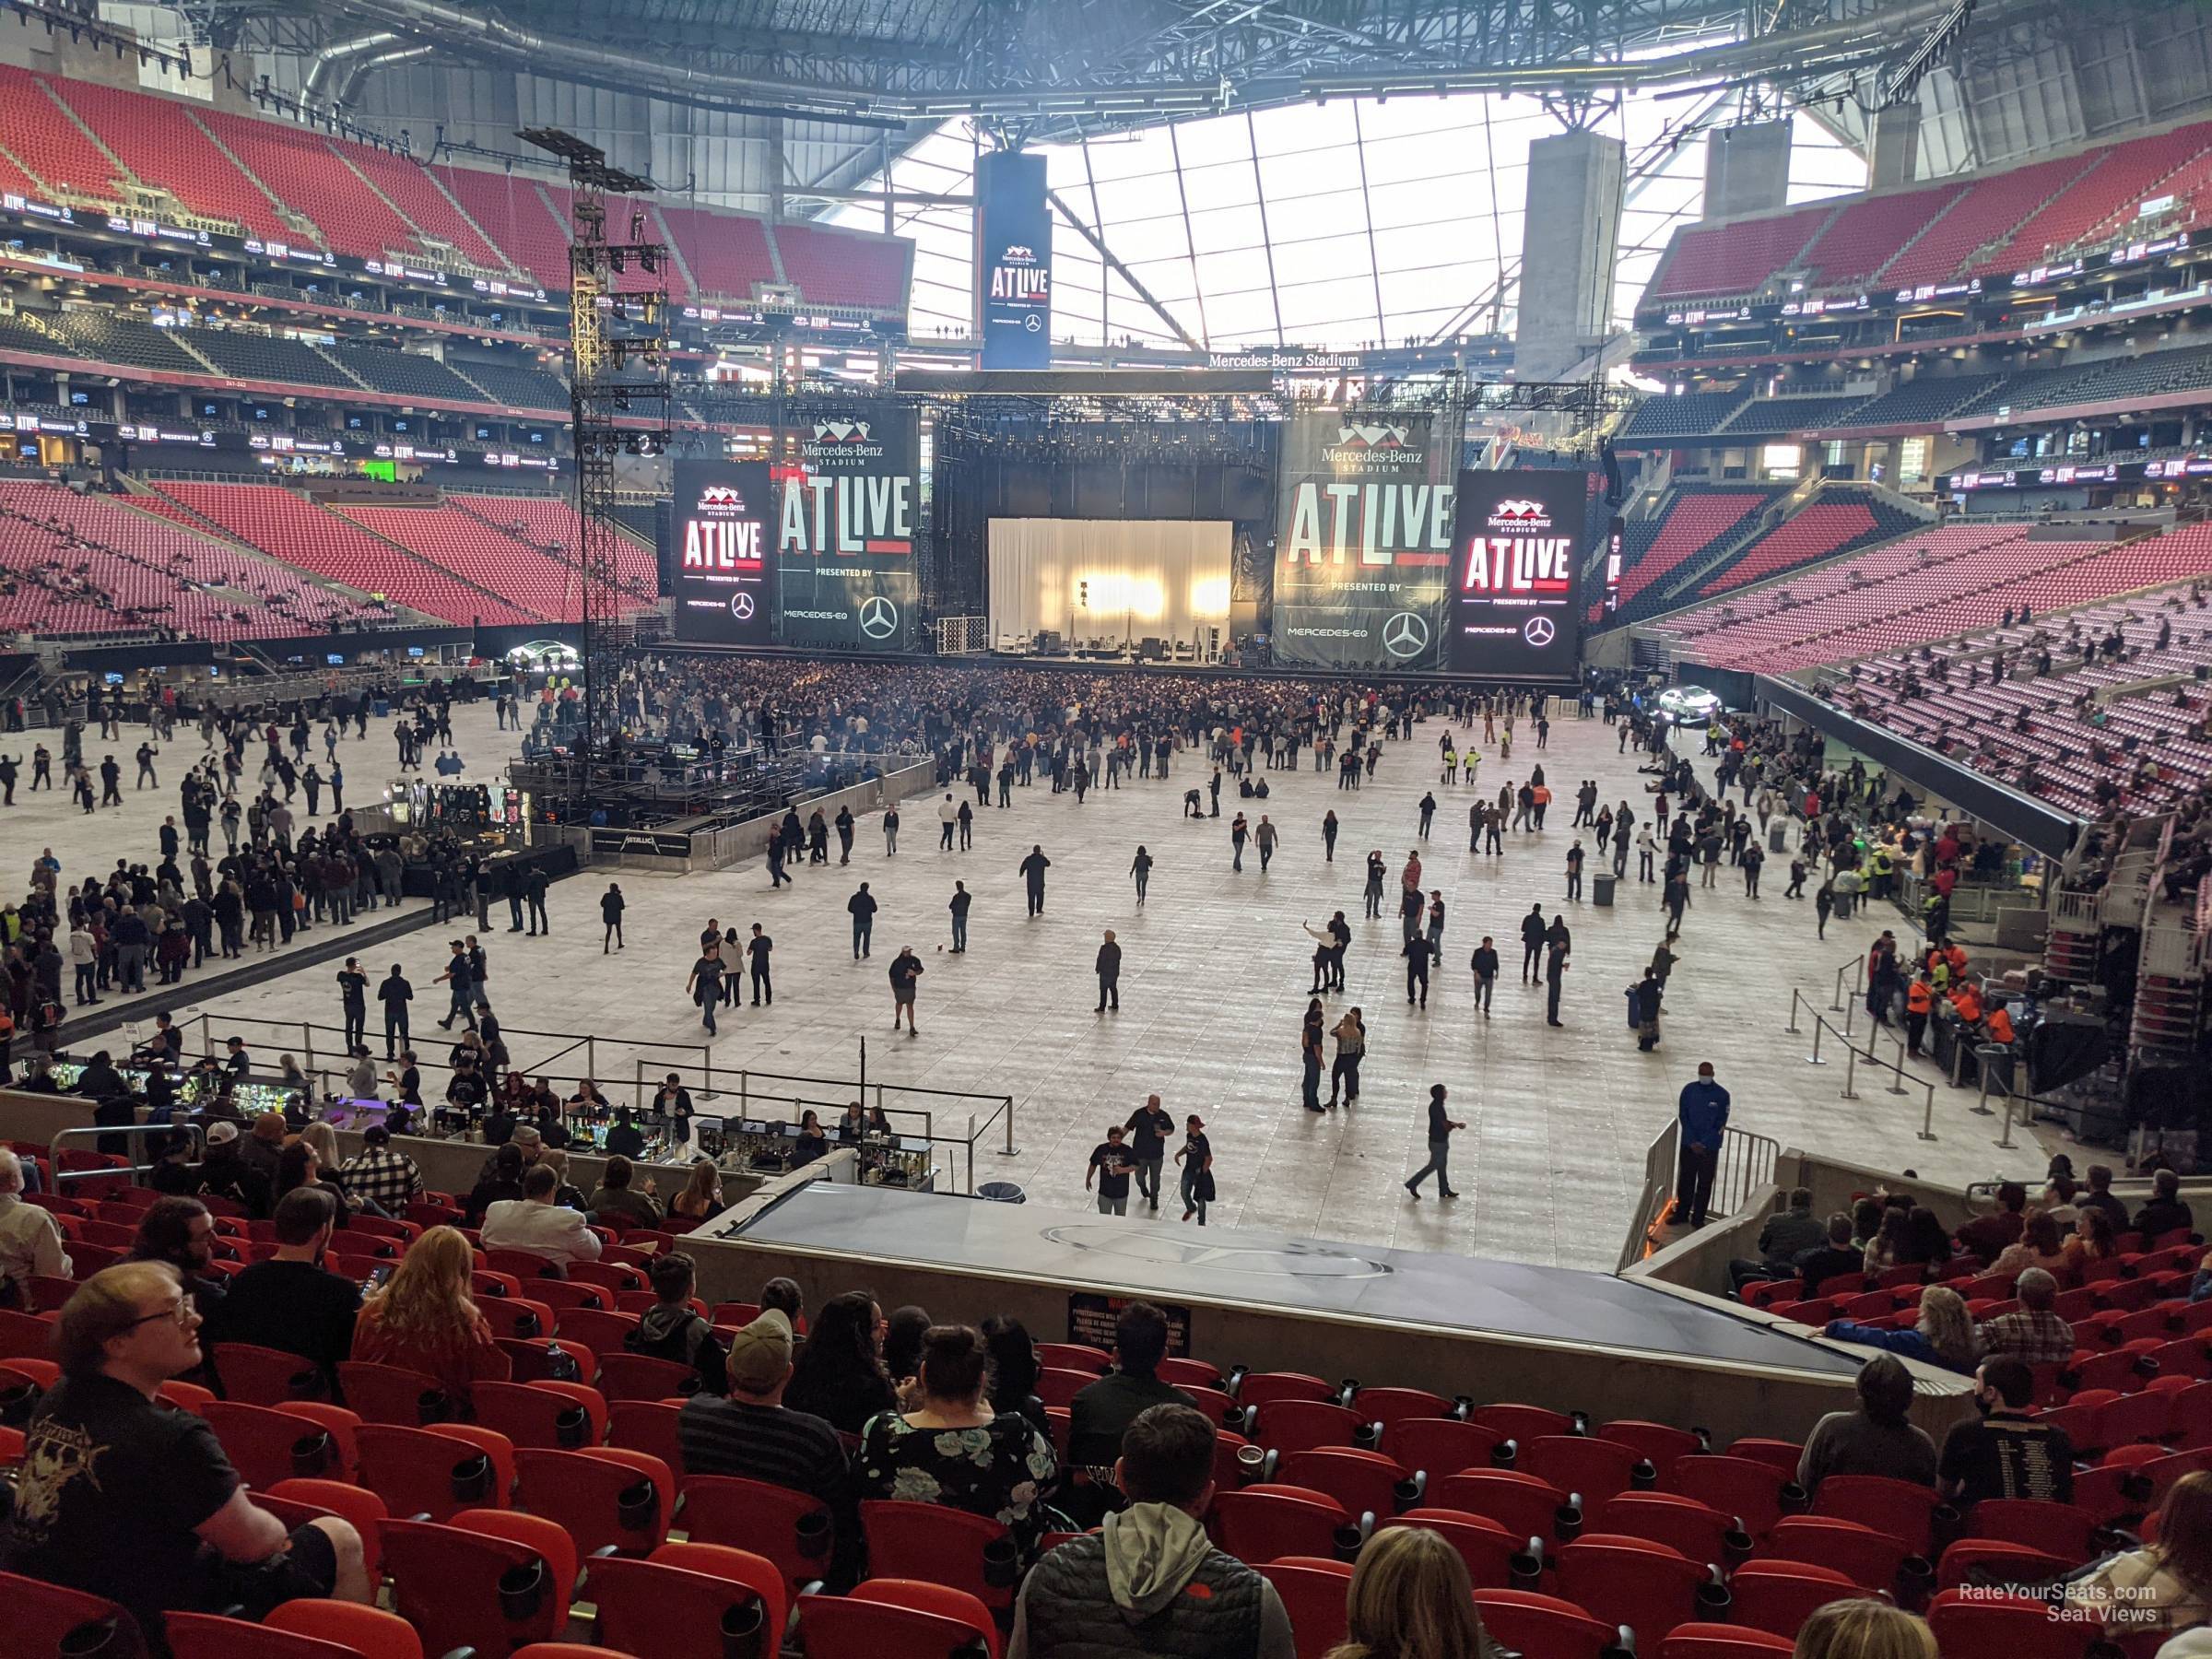 section 117, row 21 seat view  for concert - mercedes-benz stadium